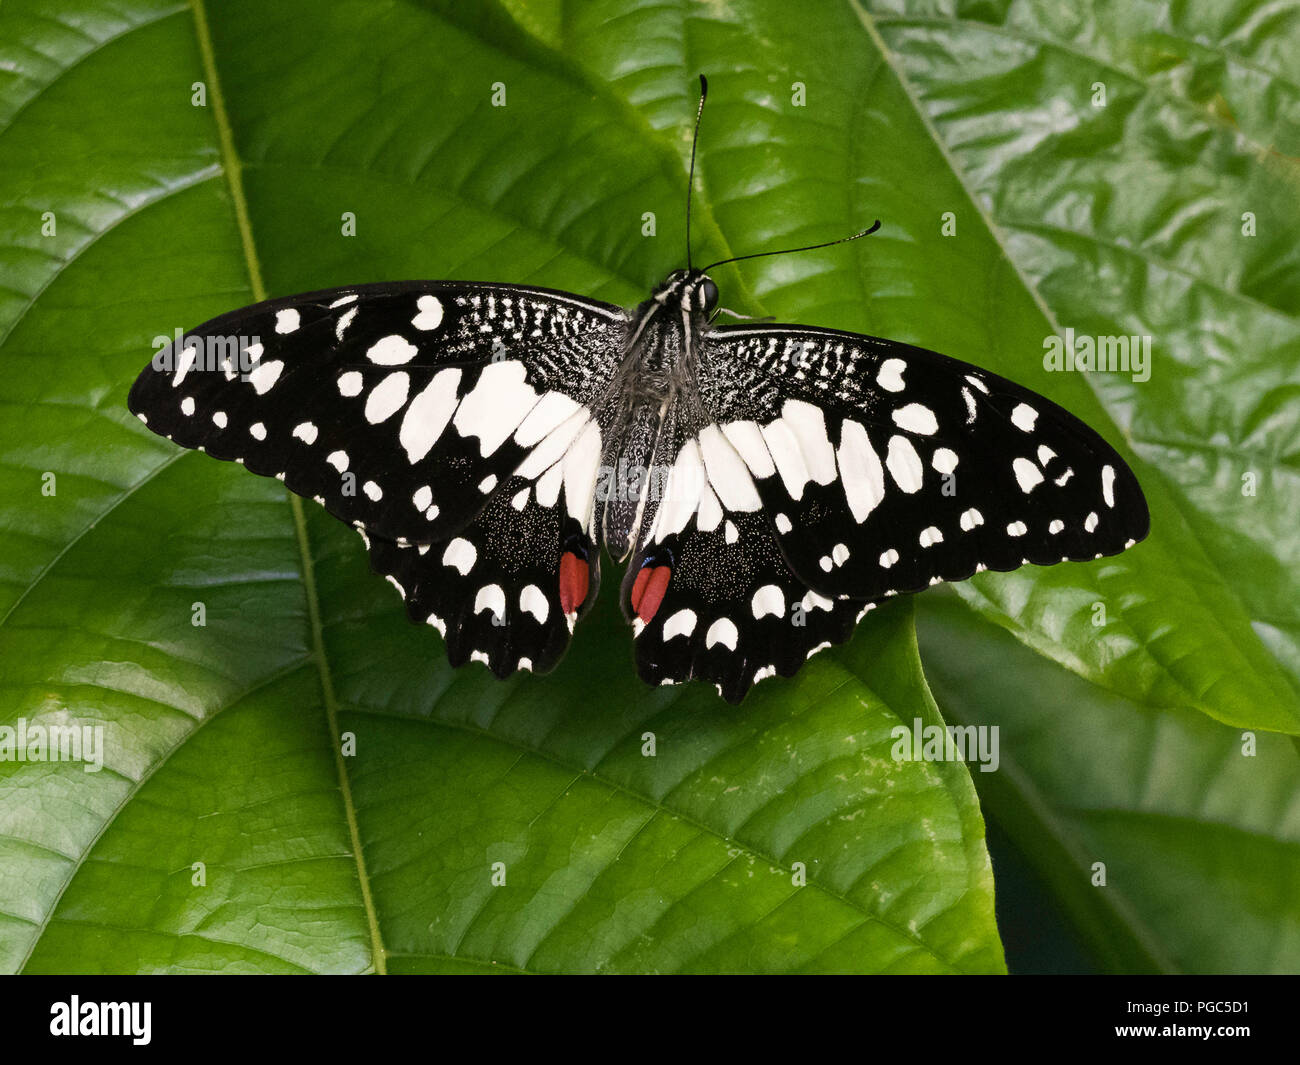 A Lime butterfly, Papilio Demoleus malayanus on a leaf in the butterfly house at Whipsnade Zoo, England Stock Photo